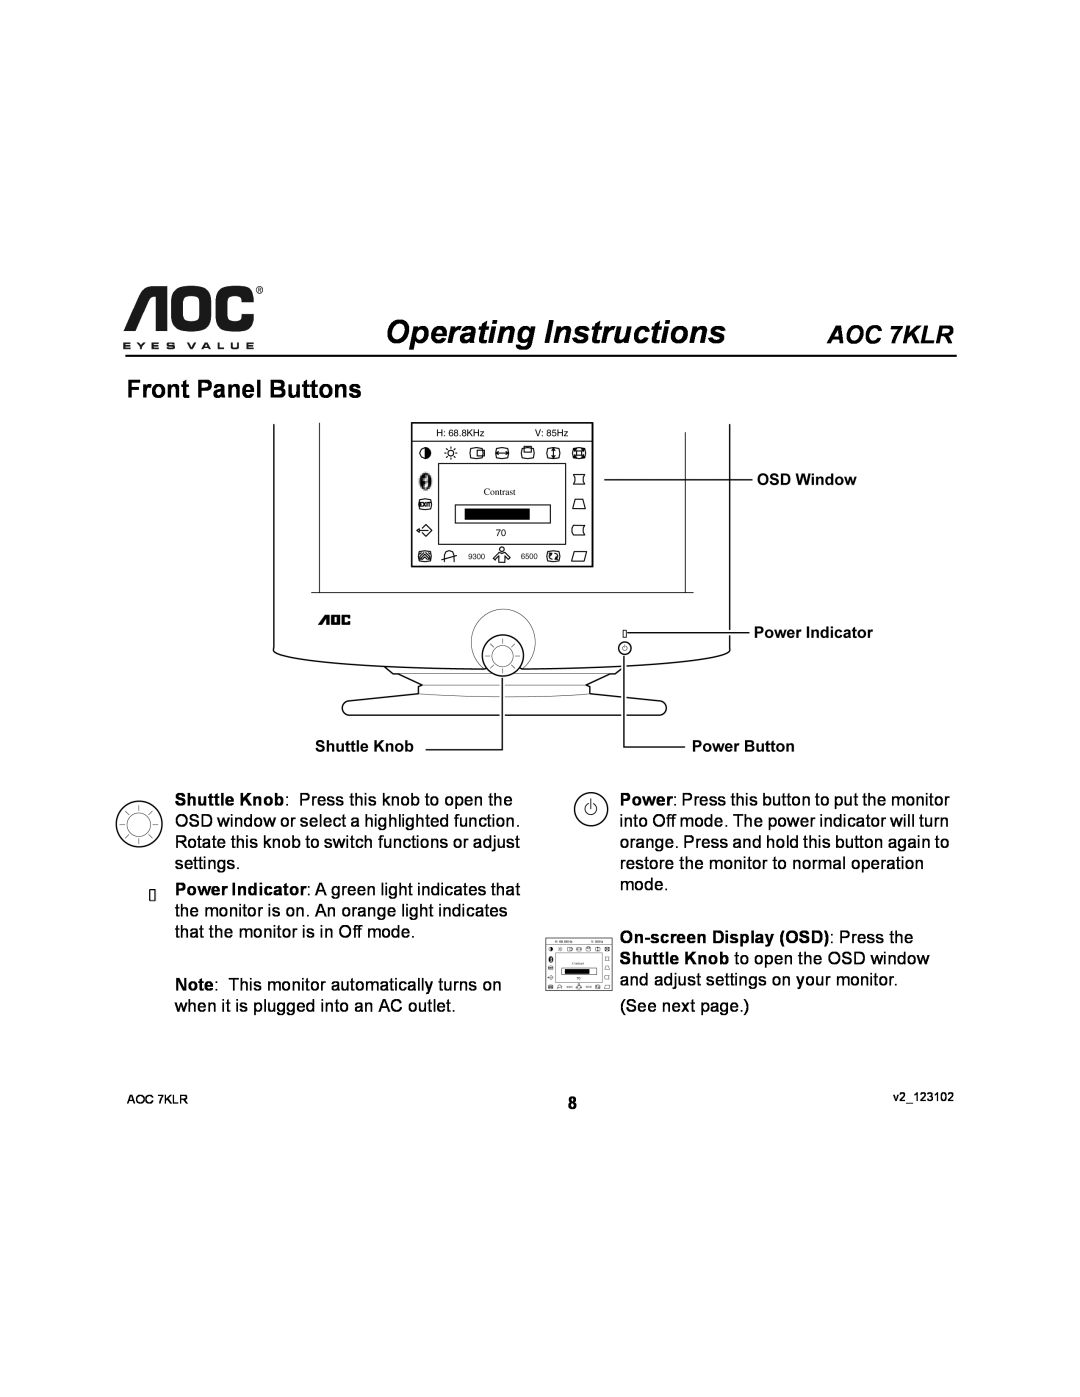 AOC user manual Operating Instructions, Front Panel Buttons, AOC 7KLR 